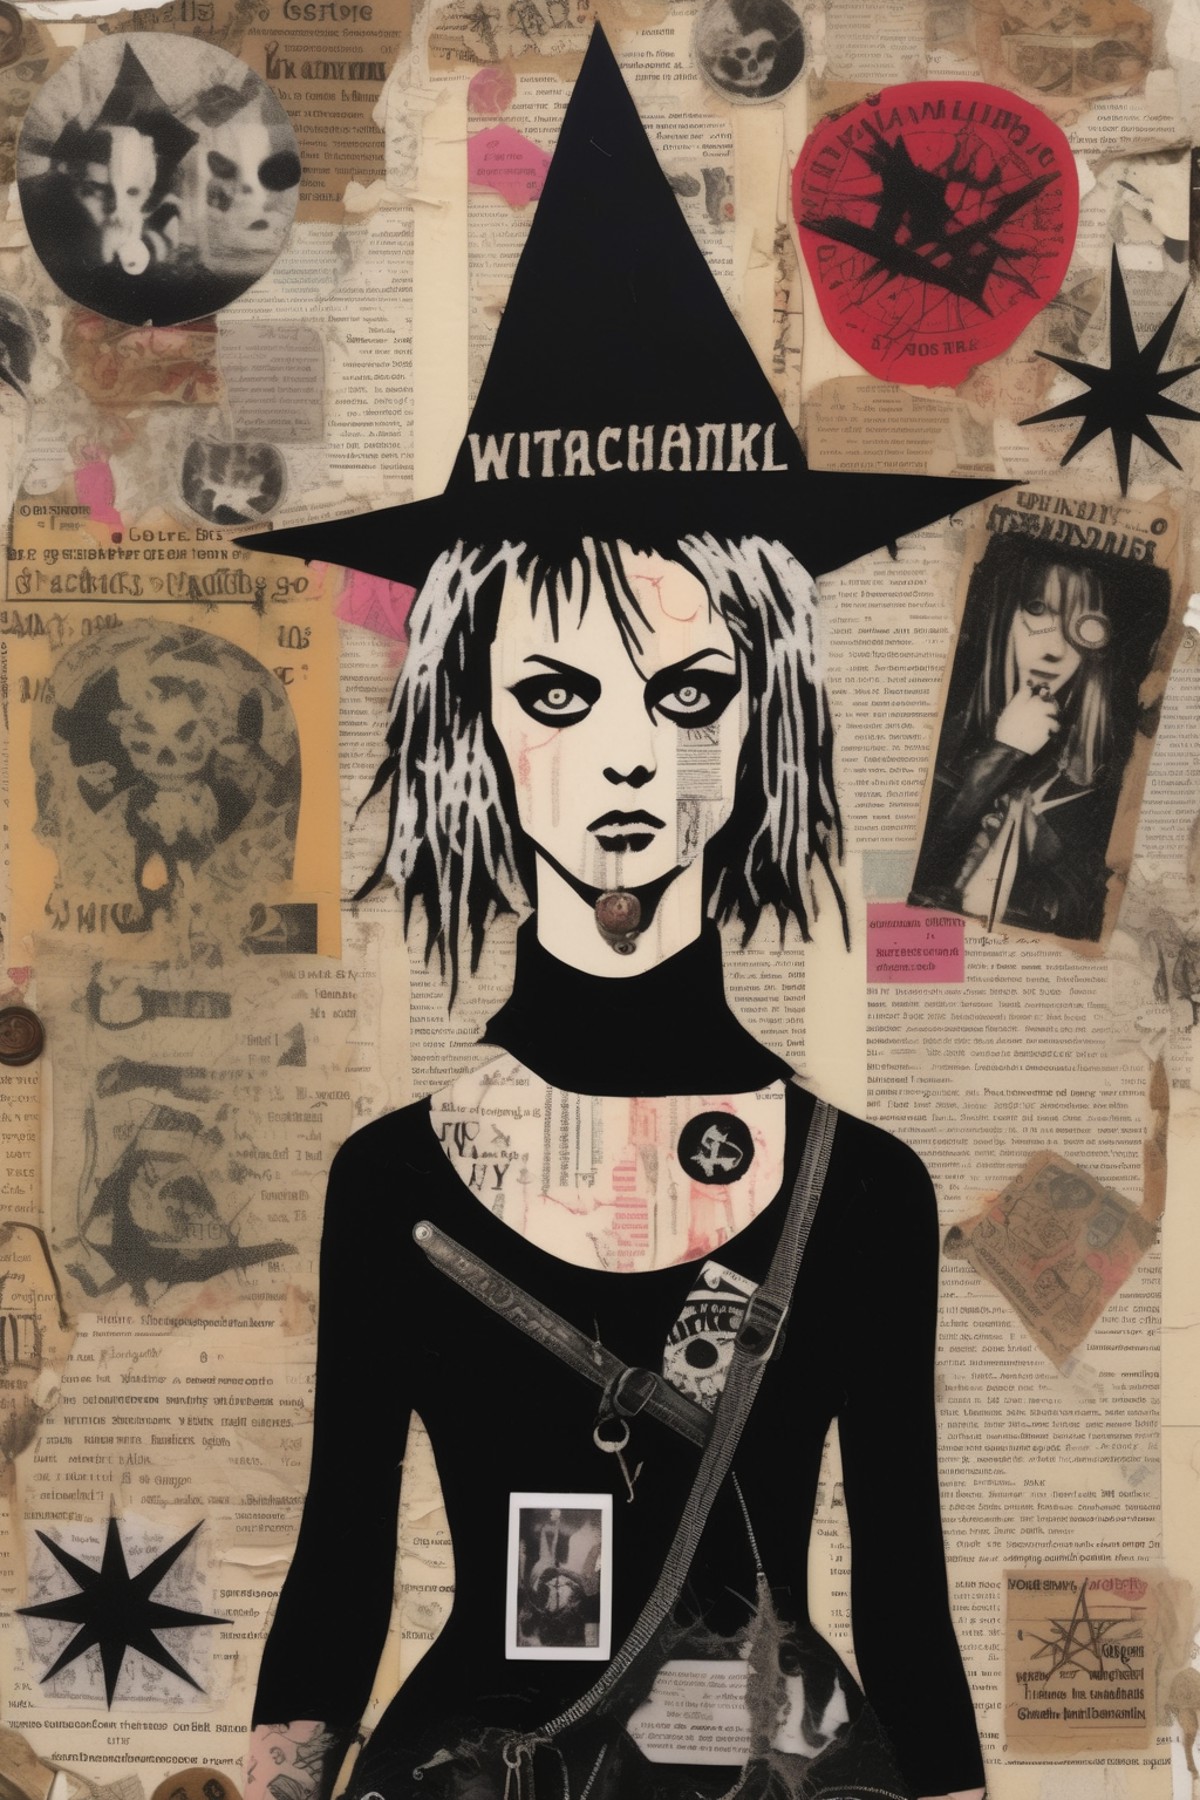 <lora:Punk Collage:1>Punk Collage - (Punk Witch Collage) A collage artwork combining punk aesthetics and witchcraft imager...